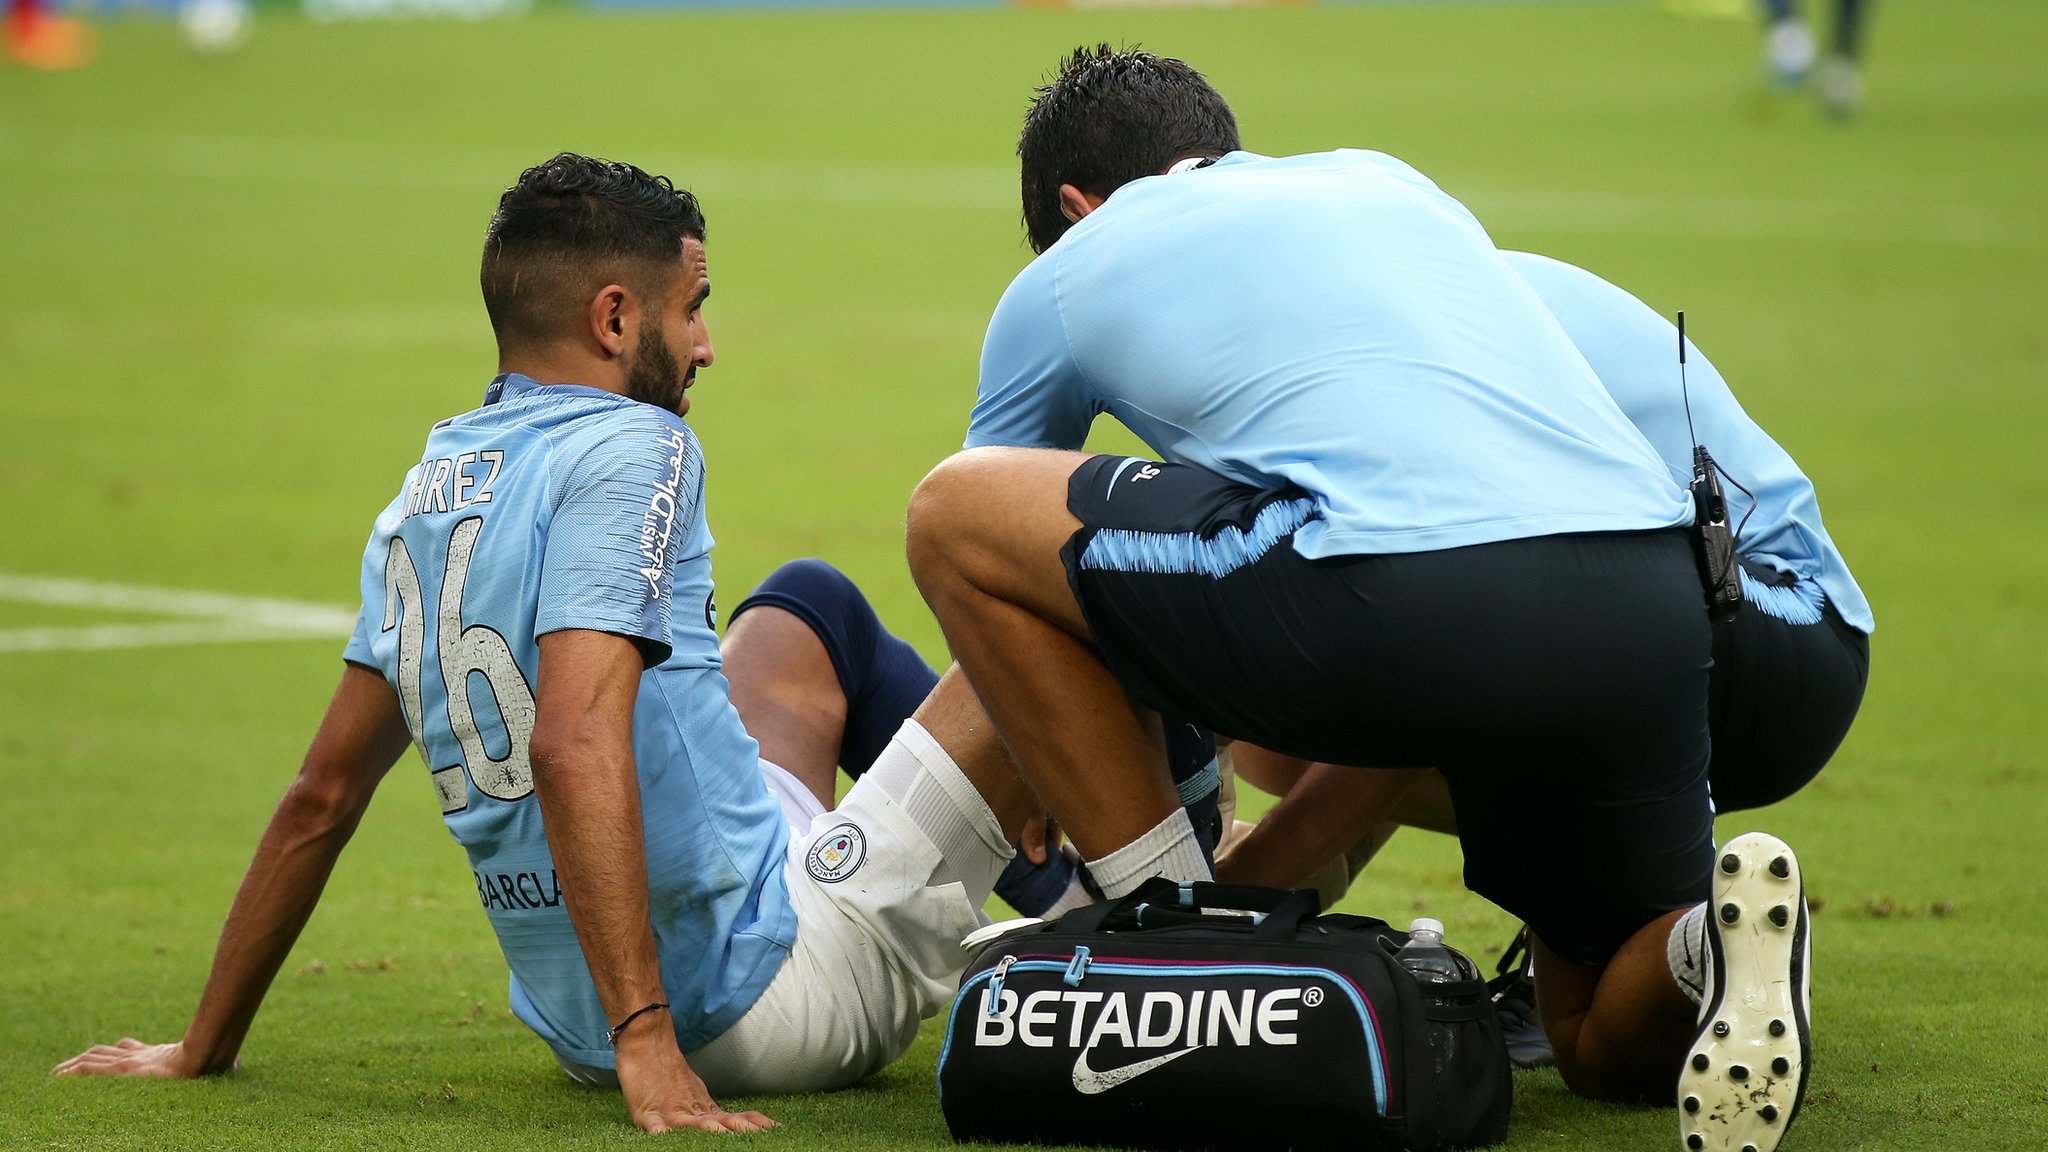 Man City winger Mahrez could be fit for Community Shield